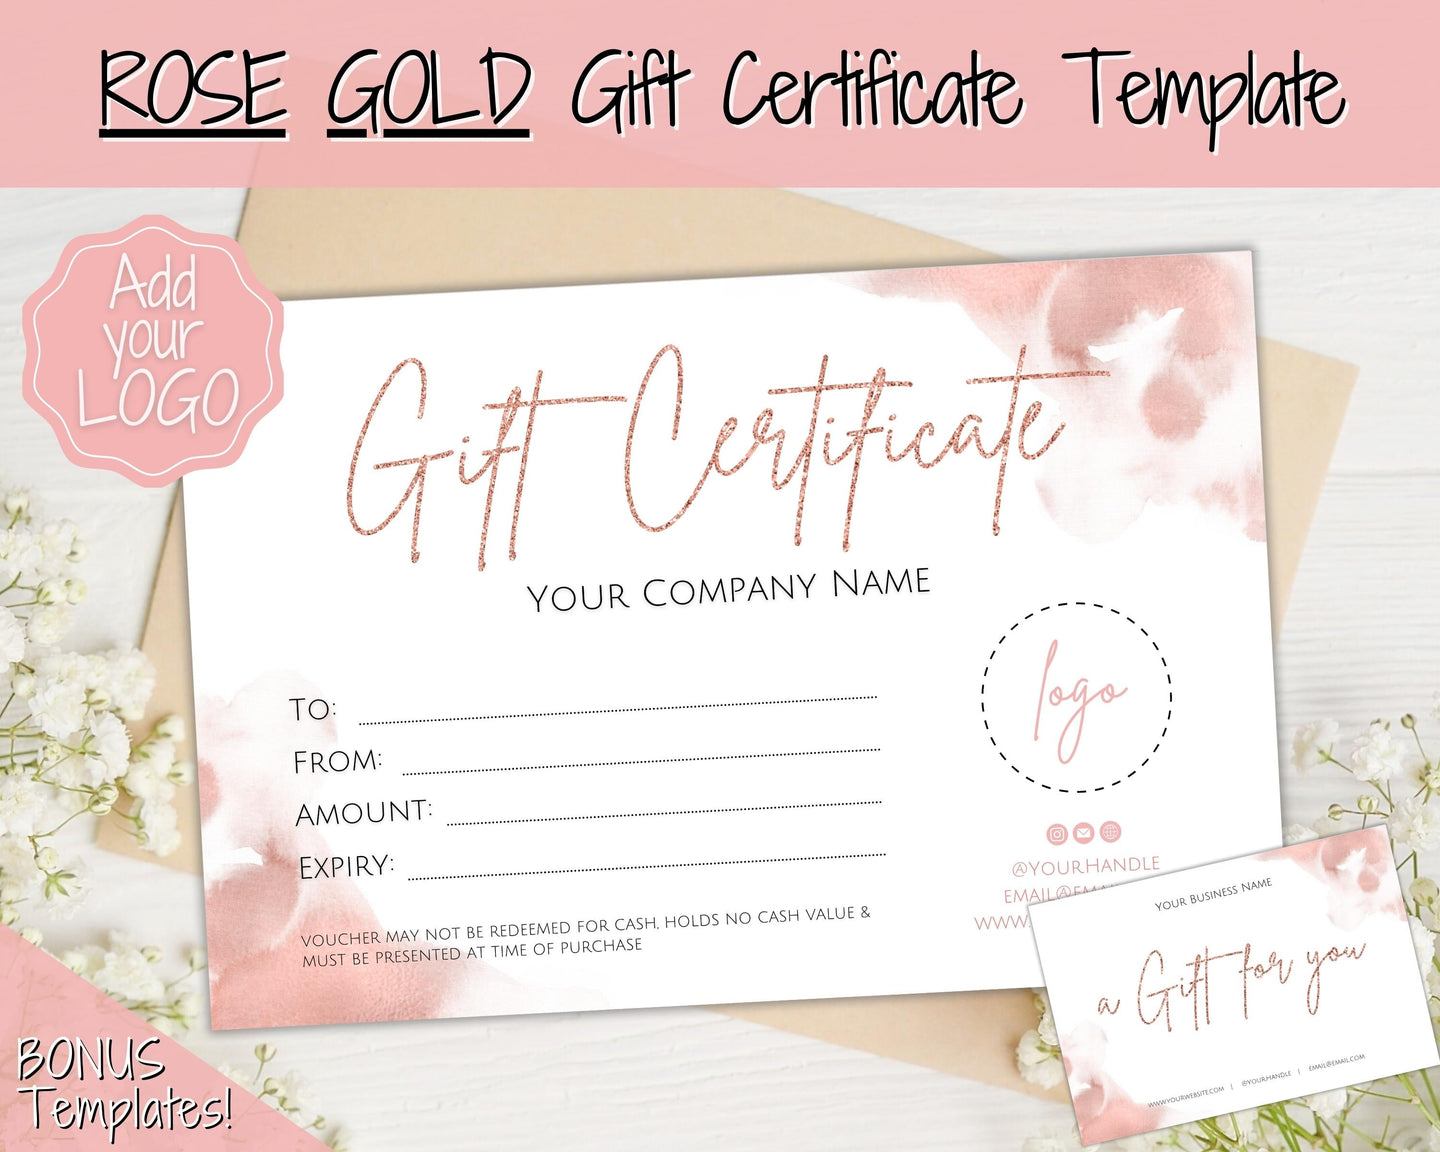 Gift Certificate Template. Editable ROSE GOLD Gift Voucher, Add Logo to Gift Card! DIY Shop Voucher Template. Last minute Coupons, Canva | Style 21